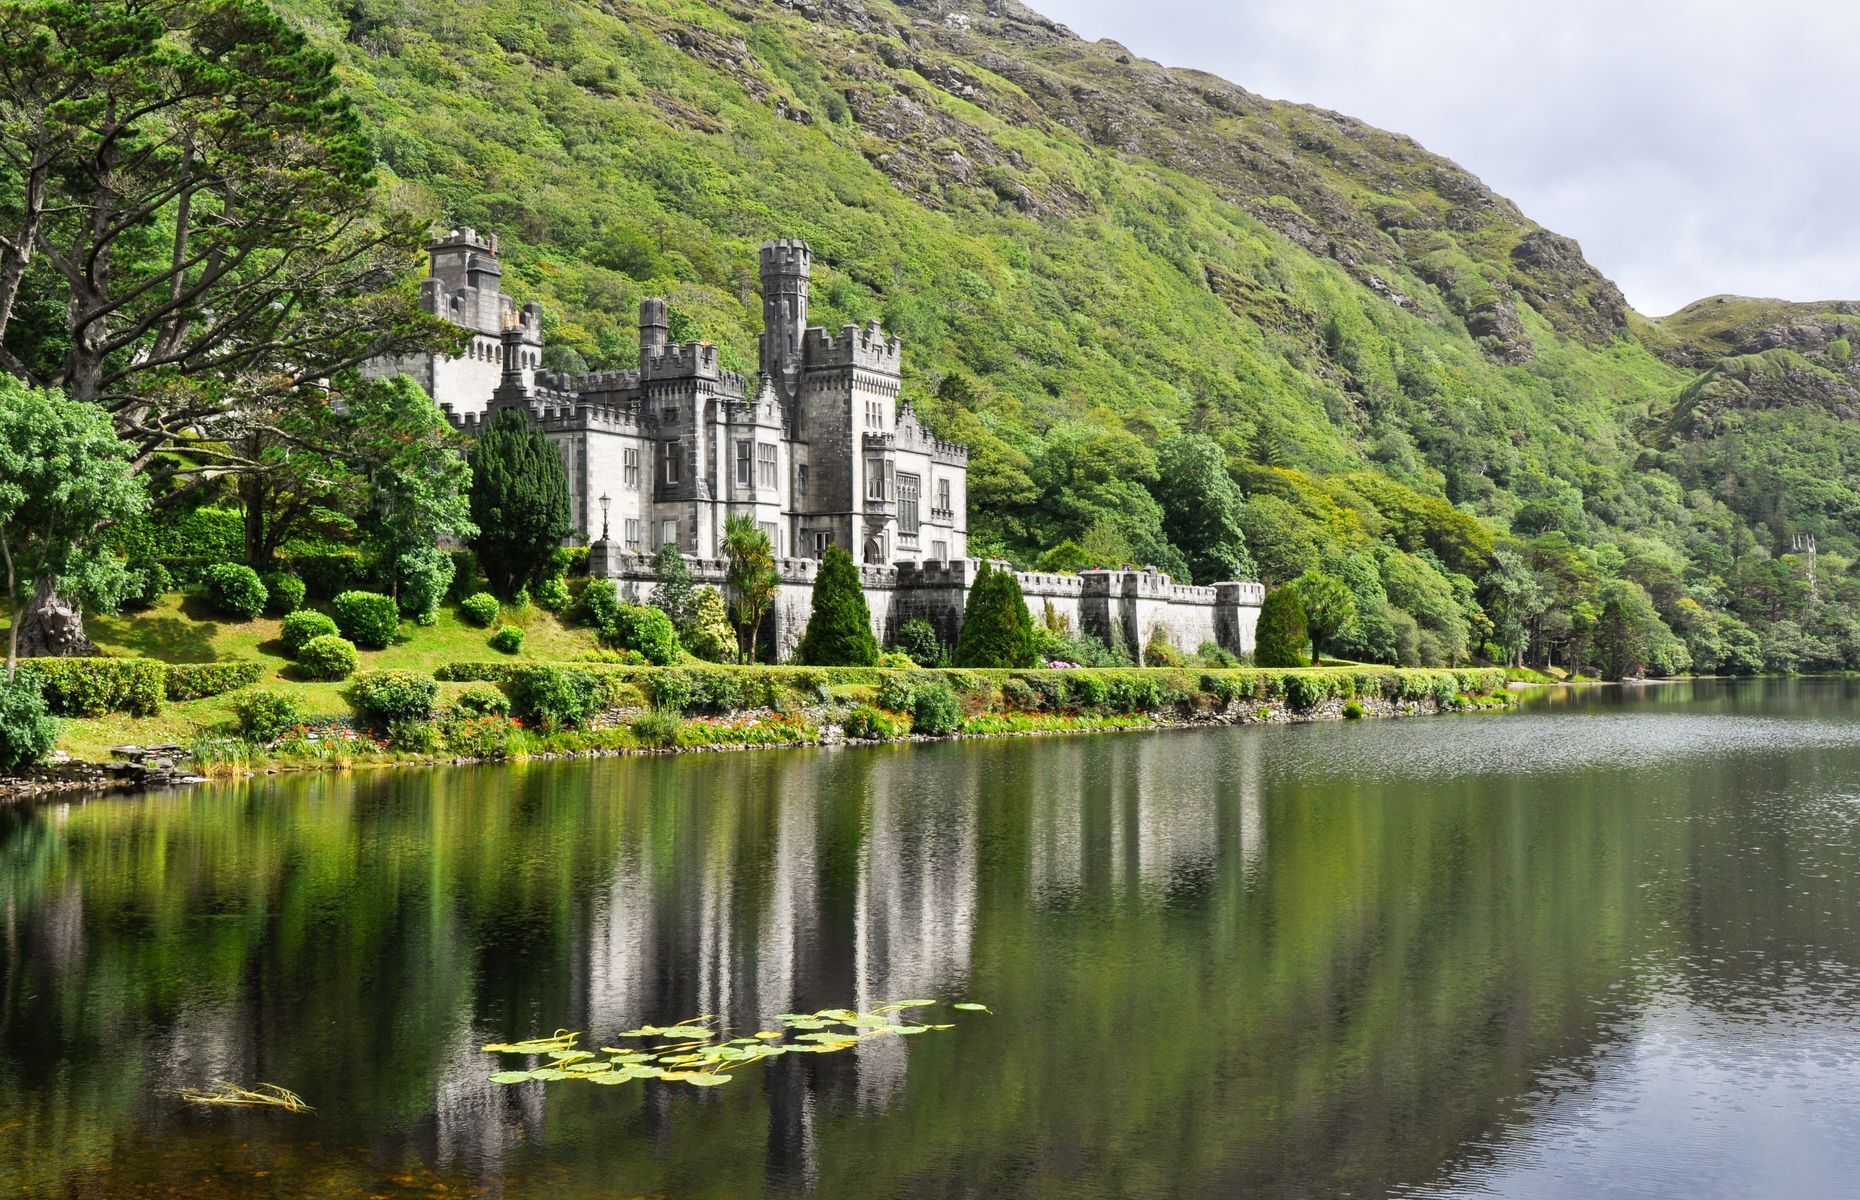 <p>About an hour’s drive from Galway on Wild Atlantic Way, in the heart of the Connemara region, you’ll find beautiful <a href="https://www.kylemoreabbey.com/" rel="noreferrer noopener">K</a><a href="https://www.kylemoreabbey.com/" rel="noreferrer noopener">ylemore Abbey.</a> Built in the late 1800s by a wealthy businessman, this enchanting estate of over 1,000 acres has been managed by a Benedictine community since 1920.</p>